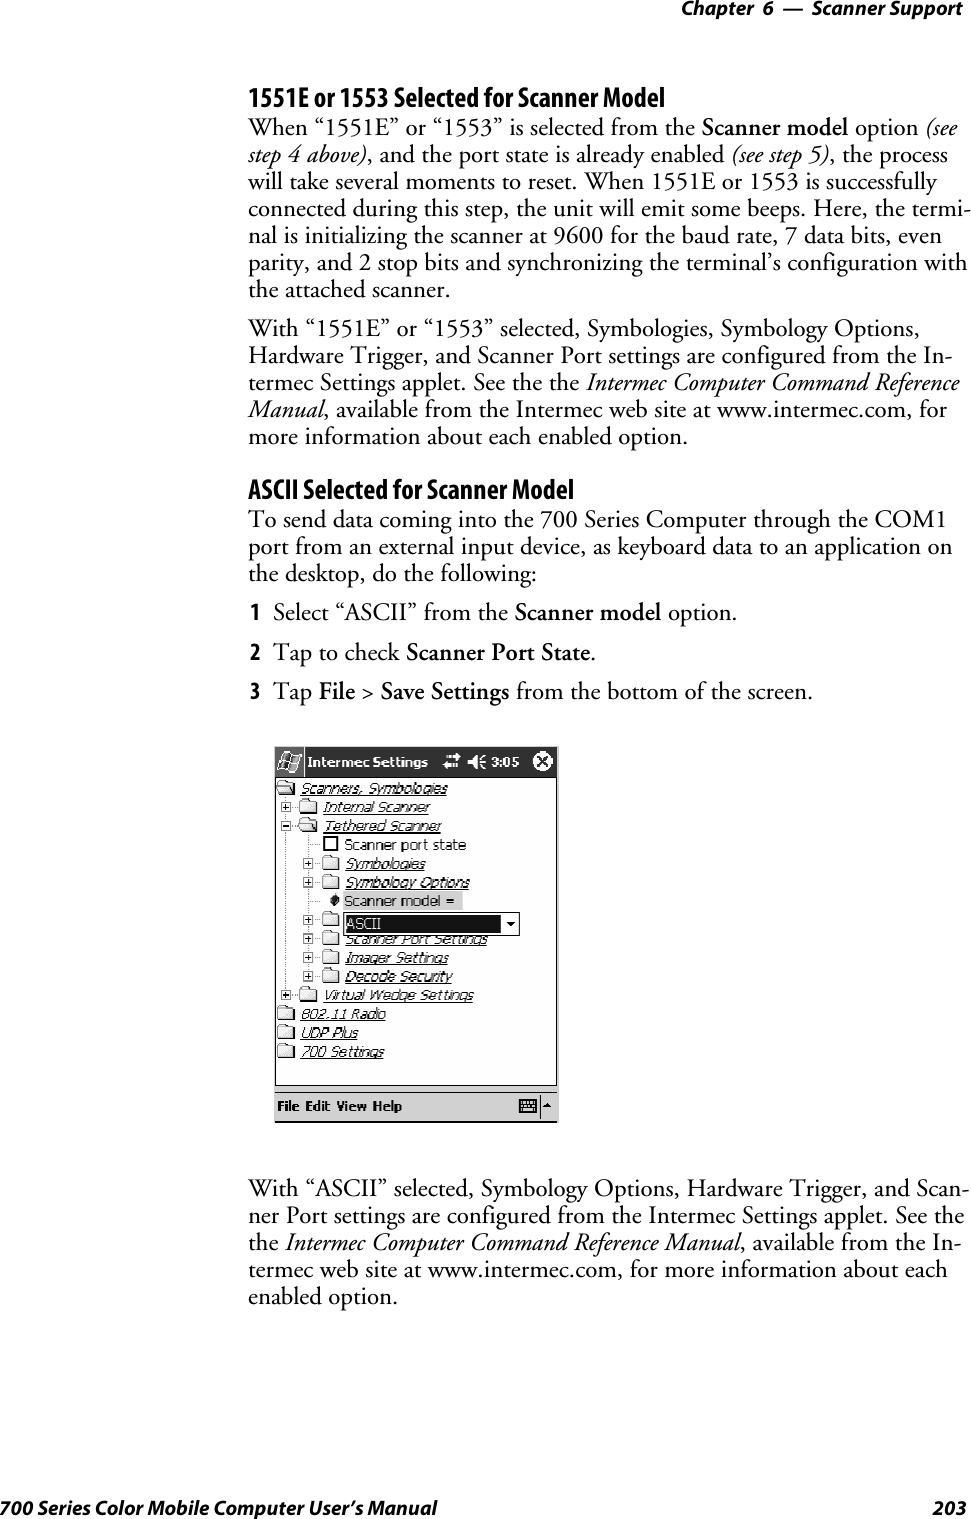 6 Scanner Support—Chapter203700 Series Color Mobile Computer User’s Manual1551E or 1553 Selected for Scanner ModelWhen “1551E” or “1553” is selected from the Scanner model option (seestep 4 above), and the port state is already enabled (see step 5),theprocesswill take several moments to reset. When 1551E or 1553 is successfullyconnected during this step, the unit will emit some beeps. Here, the termi-nal is initializing the scanner at 9600 for the baud rate, 7 data bits, evenparity, and 2 stop bits and synchronizing the terminal’s configuration withthe attached scanner.With “1551E” or “1553” selected, Symbologies, Symbology Options,Hardware Trigger, and Scanner Port settings are configured from the In-termec Settings applet. See the the Intermec Computer Command ReferenceManual, available from the Intermec web site at www.intermec.com, formore information about each enabled option.ASCII Selected for Scanner ModelTo send data coming into the 700 Series Computer through the COM1port from an external input device, as keyboard data to an application onthe desktop, do the following:1Select “ASCII” from the Scanner model option.2Tap to check Scanner Port State.3Tap File &gt;Save Settings from the bottom of the screen.With “ASCII” selected, Symbology Options, Hardware Trigger, and Scan-ner Port settings are configured from the Intermec Settings applet. See thethe Intermec Computer Command Reference Manual, available from the In-termec web site at www.intermec.com, for more information about eachenabled option.